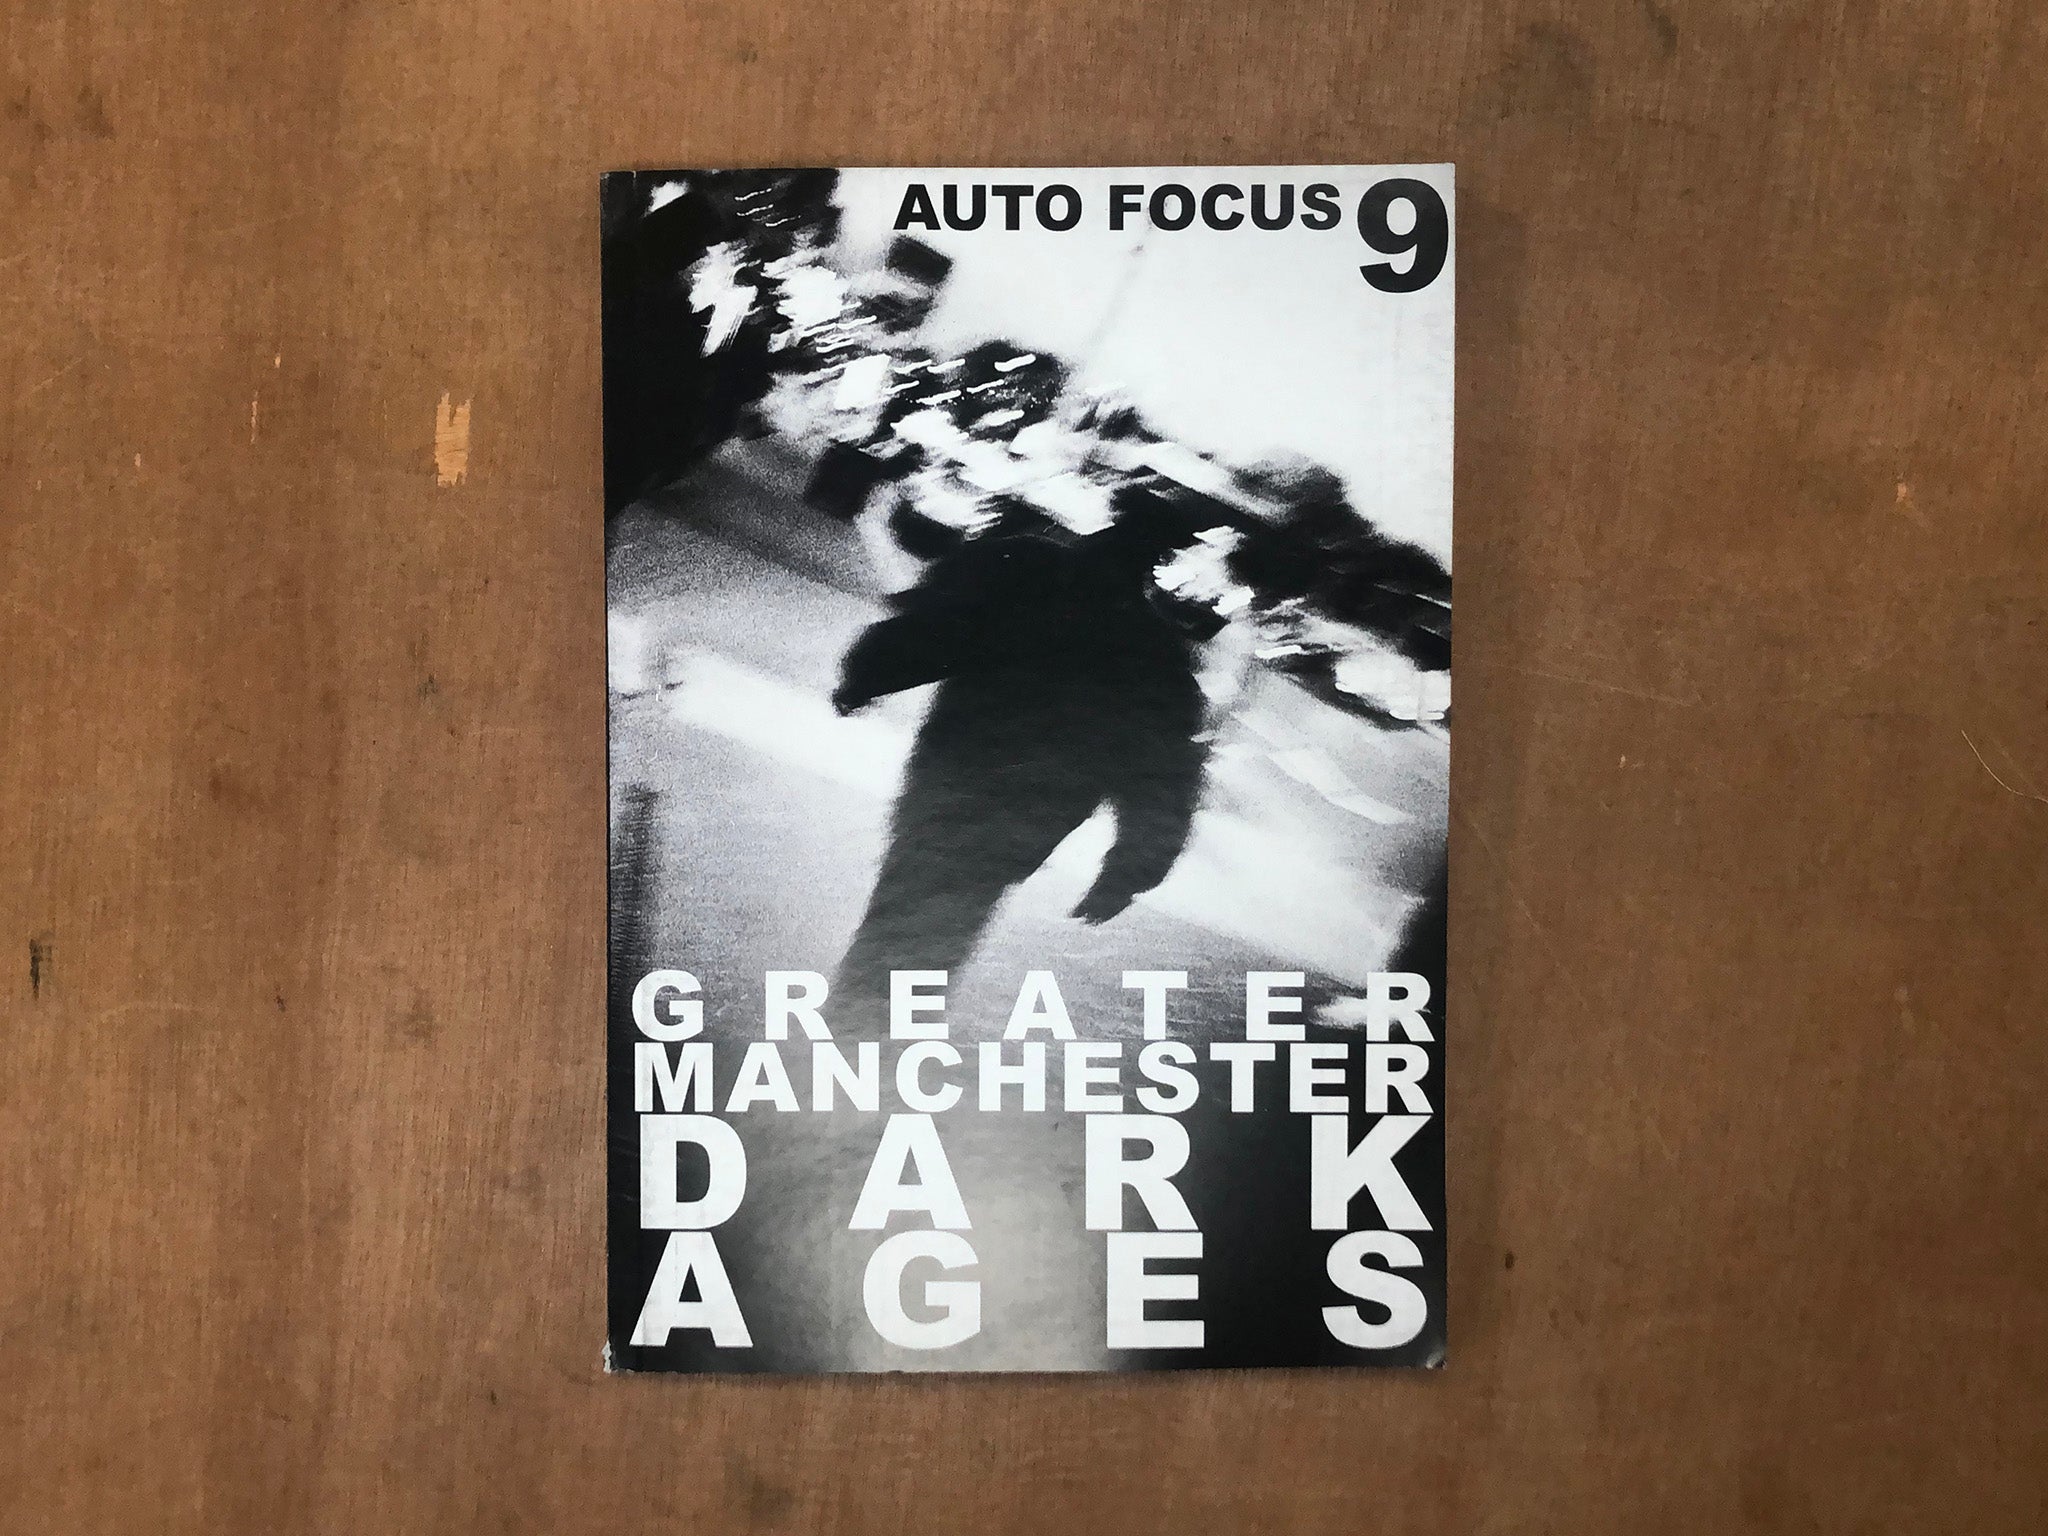 AUTO FOCUS 9: GREATER MANCHESTER DARK AGES by Sam Waller